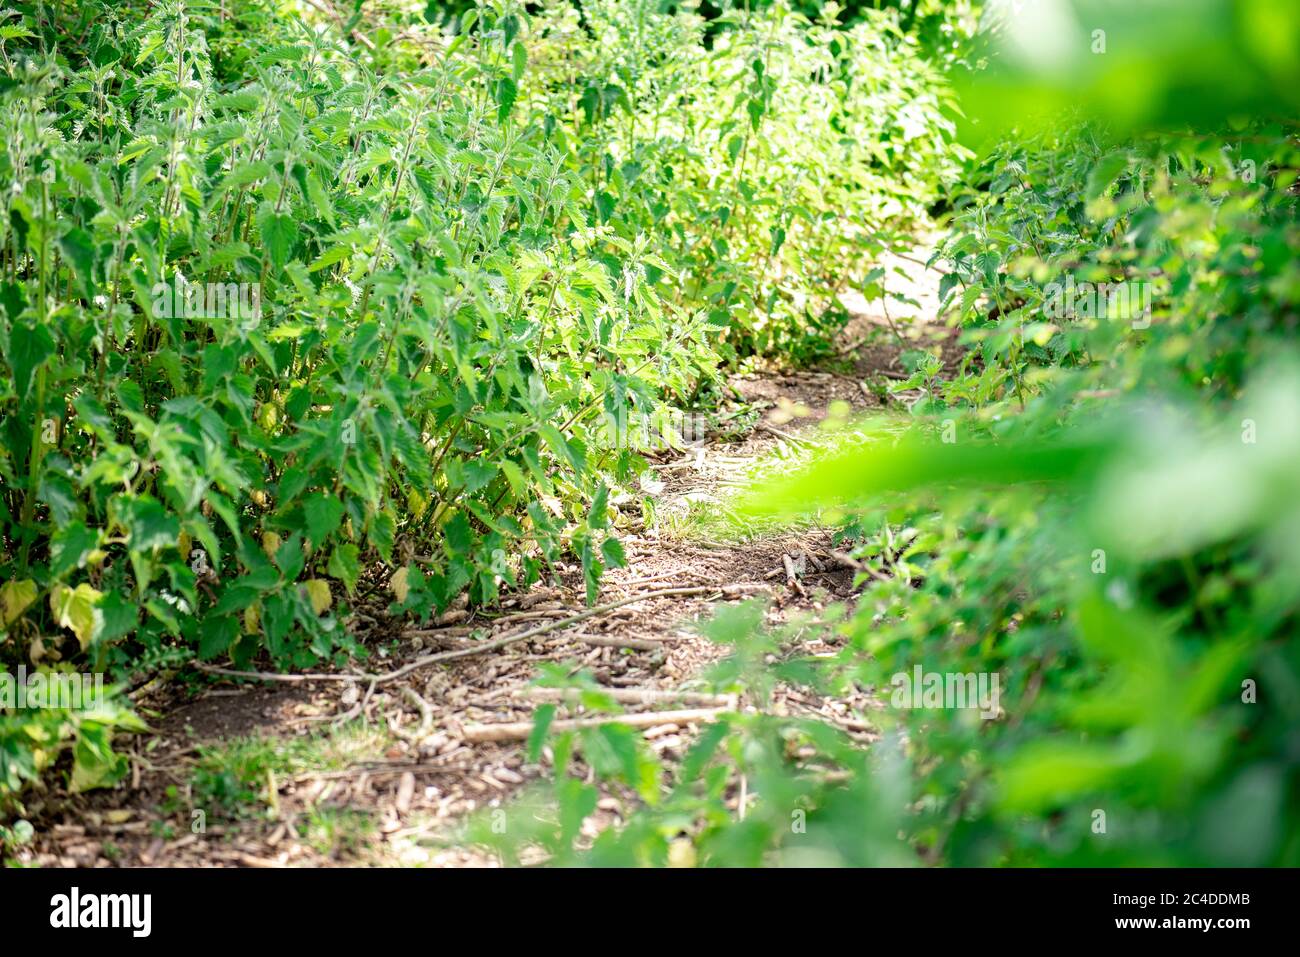 Bed of nettles in a country park Stock Photo